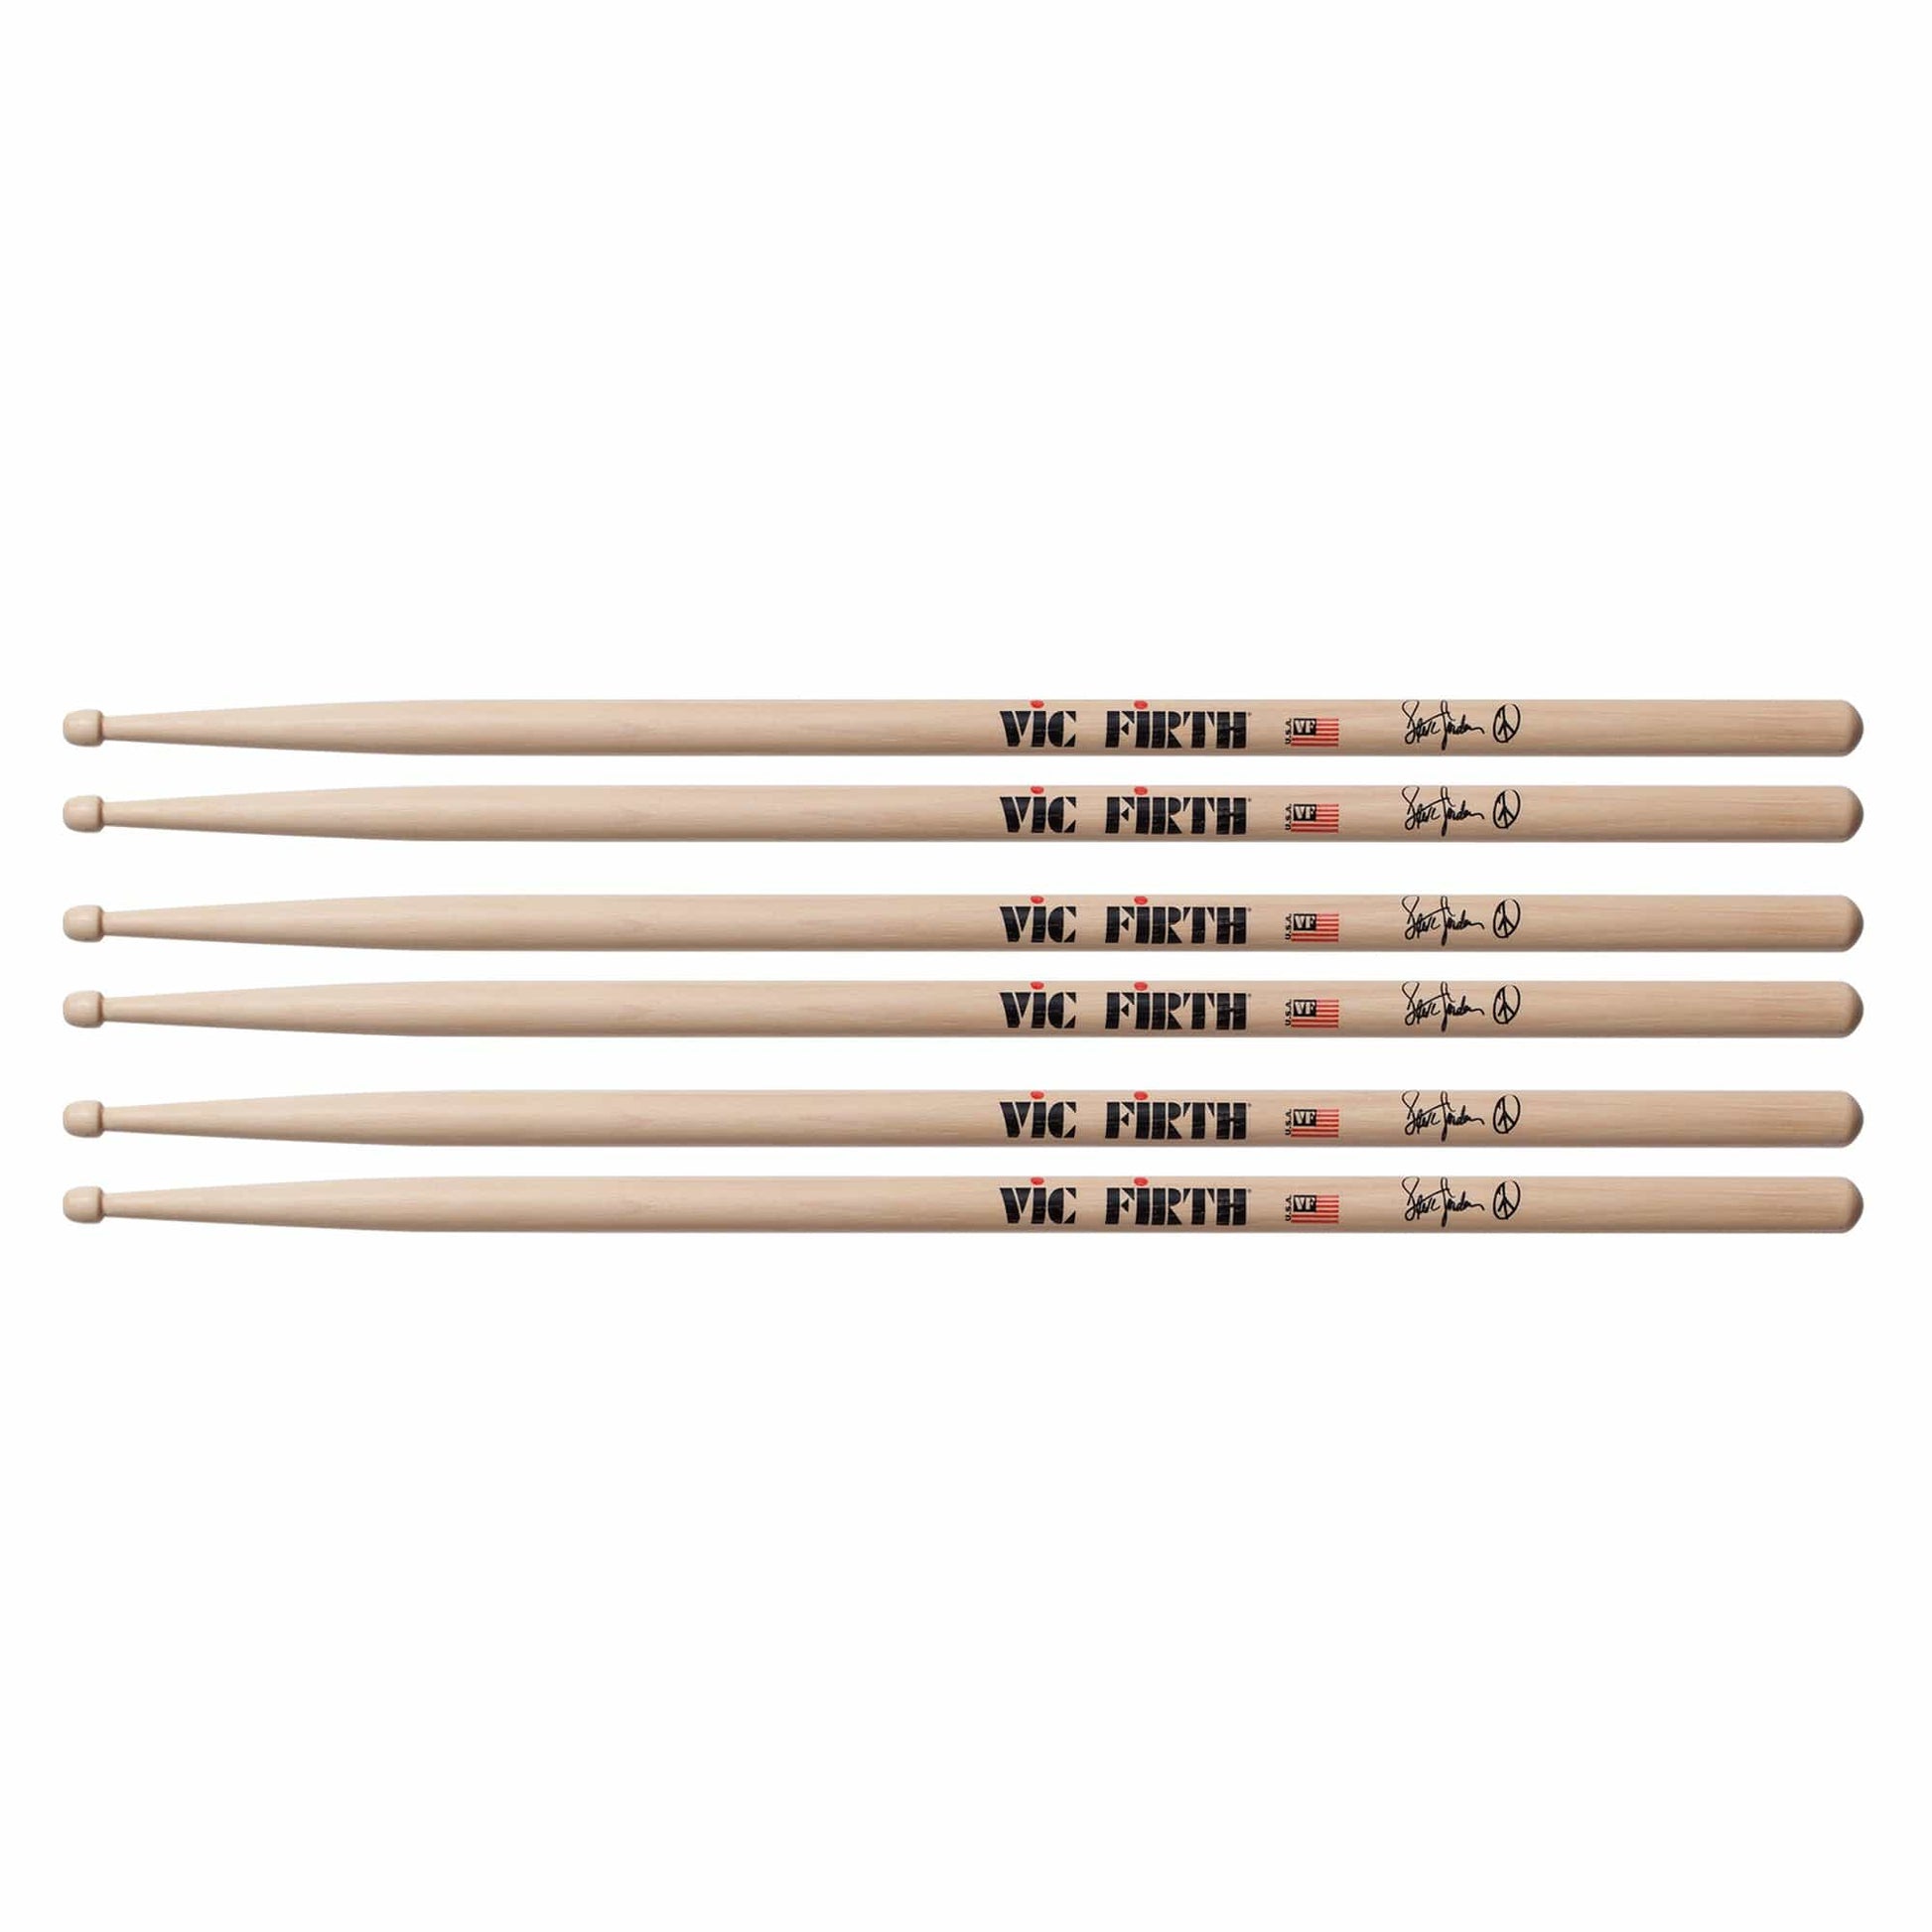 Vic Firth Steve Jordan Signature Drum Sticks (3 Pair Bundle) Drums and Percussion / Parts and Accessories / Drum Sticks and Mallets